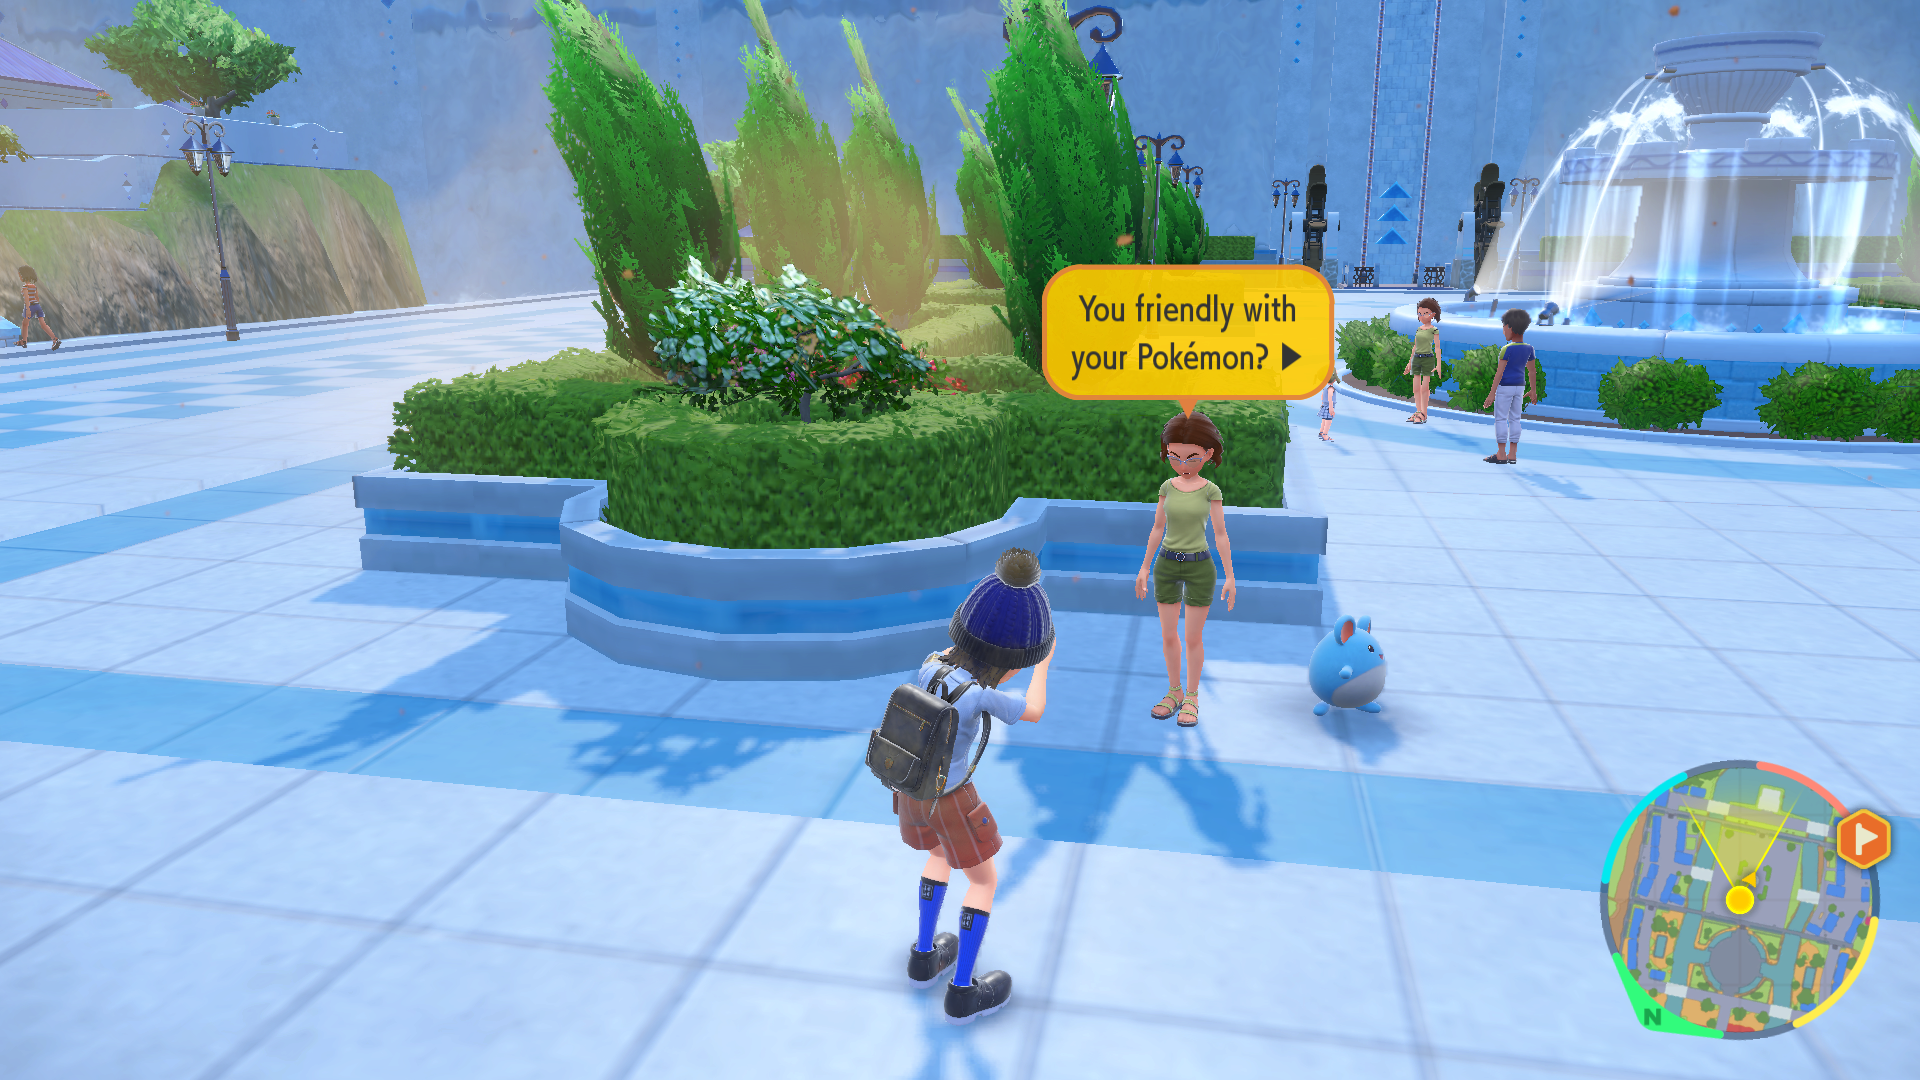 You can check your Pokemons Friendship Level by talking to the NPC in Cascarrafa.